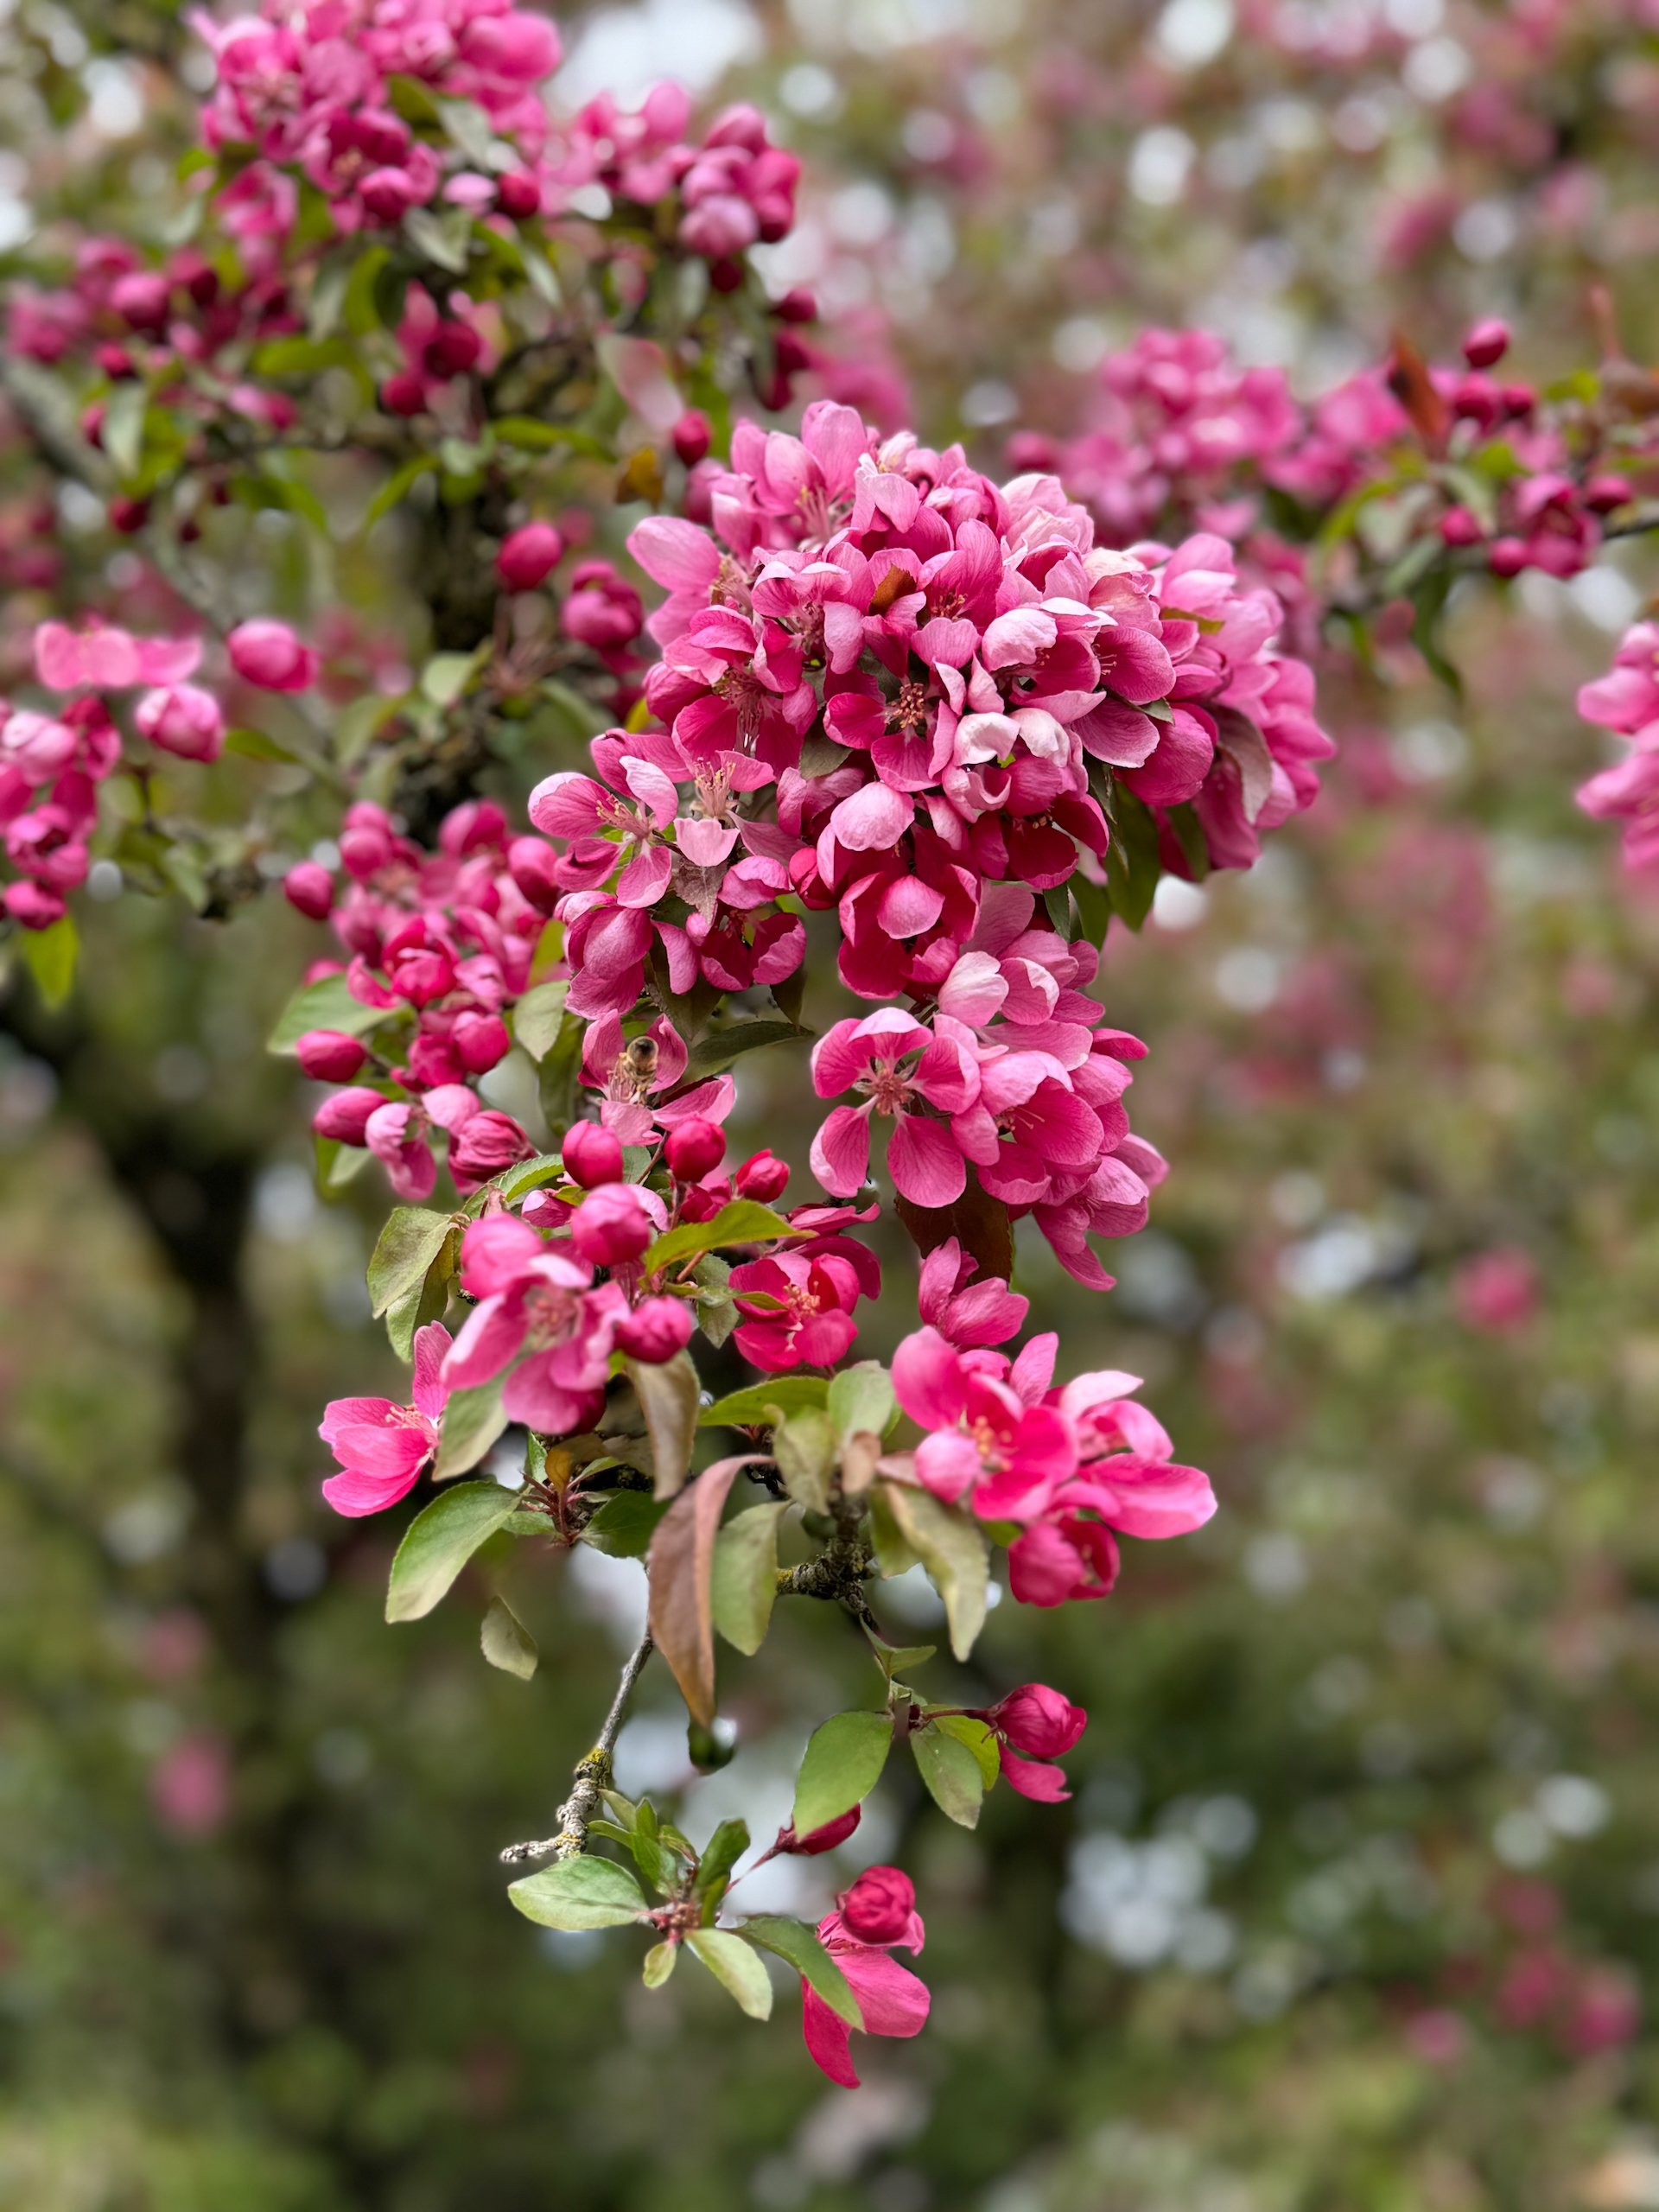  Flowering crab apple. We just planted one on Galiano - hopefully it will give us some blossoms like this! 